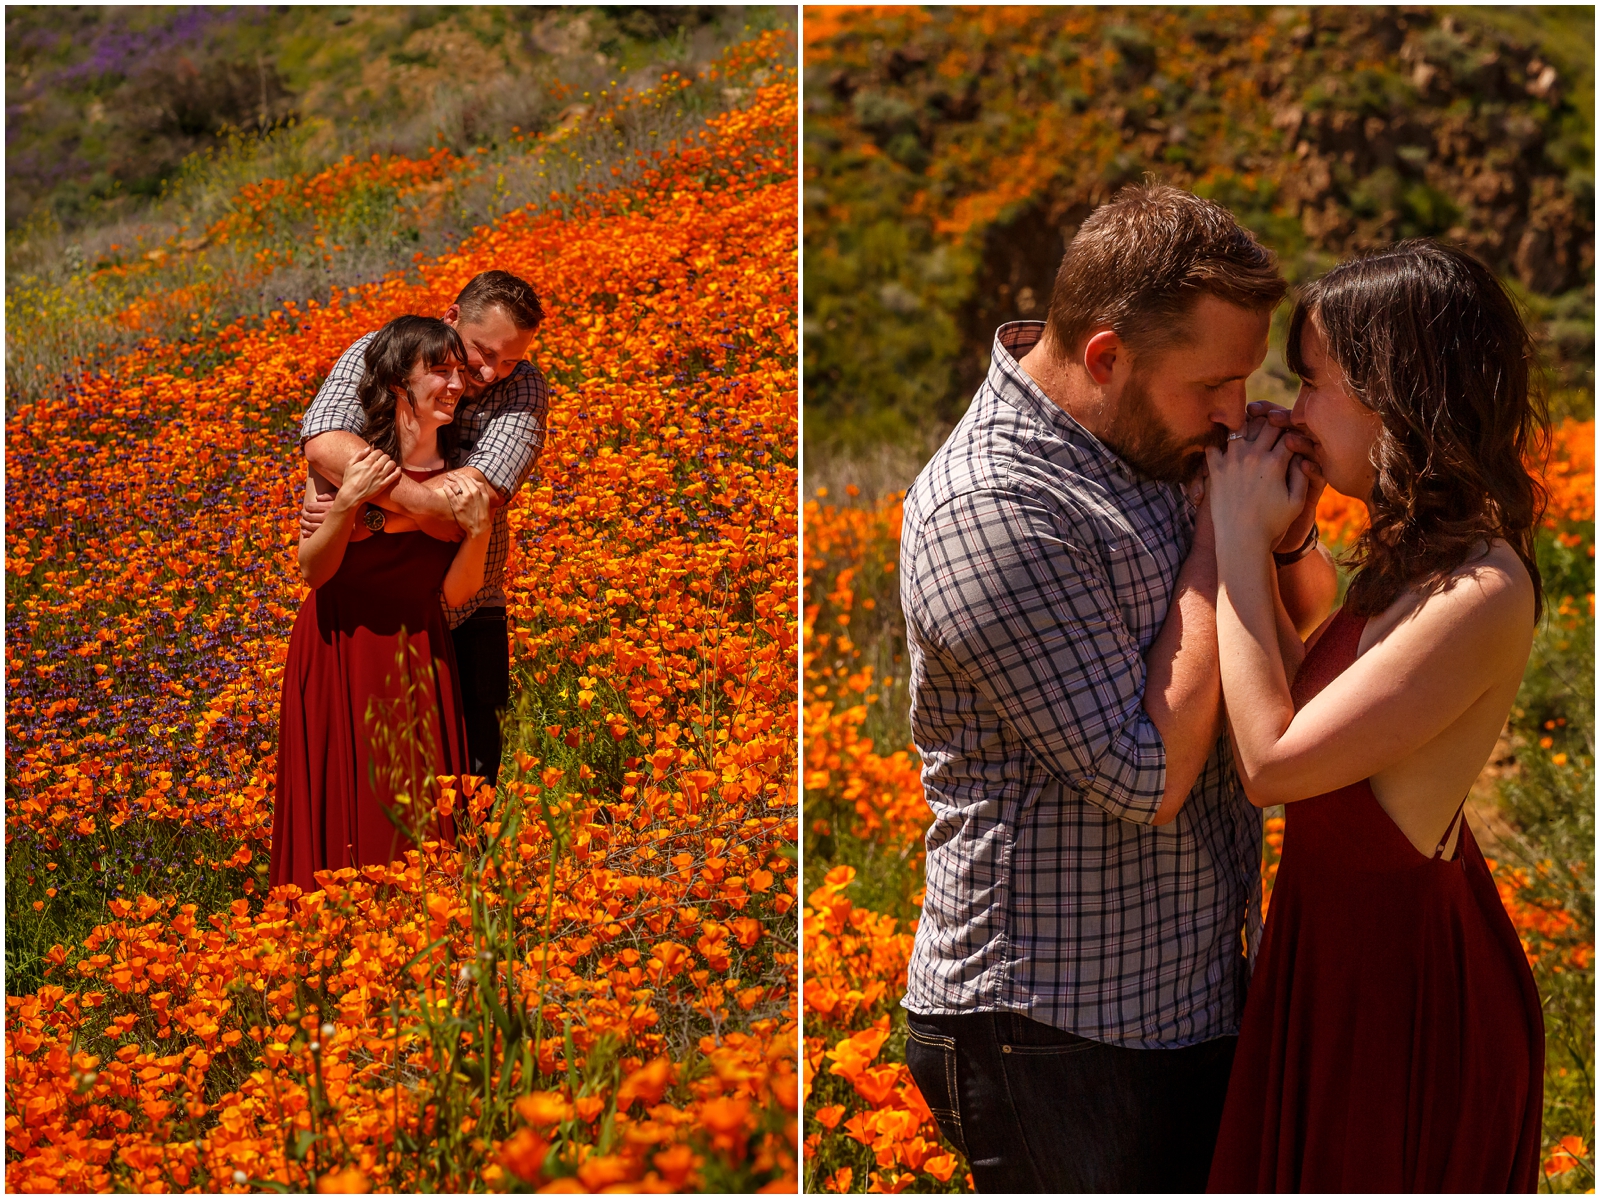 Engagement session in CA Super Bloom wildflower field.